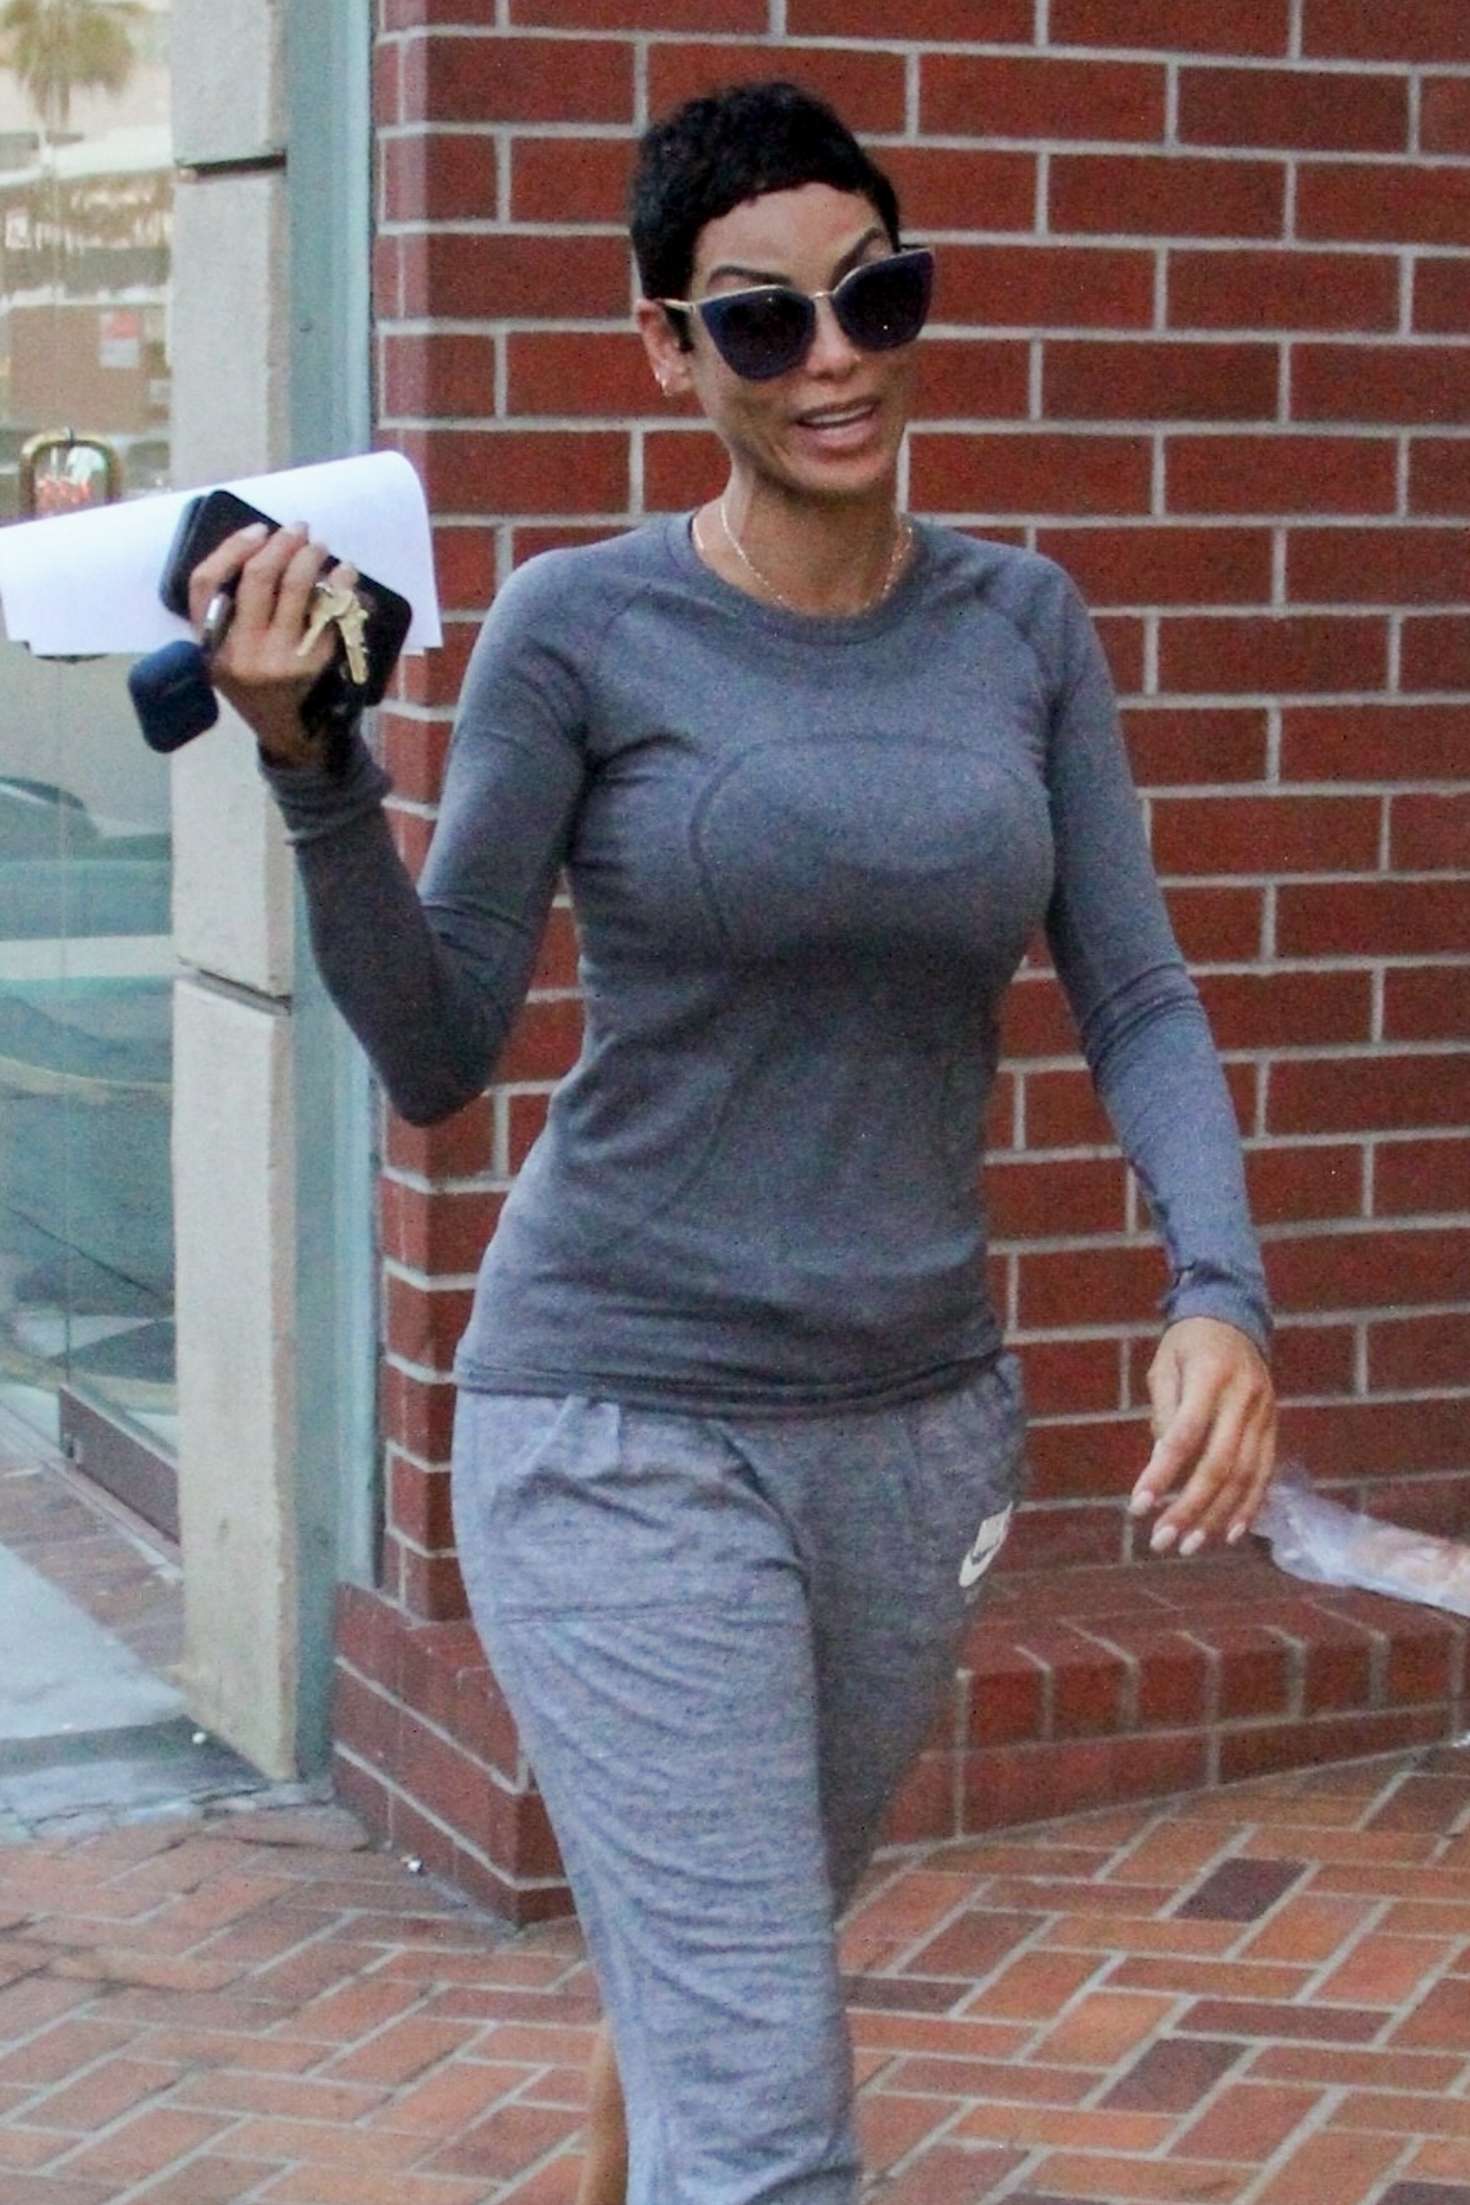 Nicole Murphy - Shopping at Rite Aid in Beverly Hills